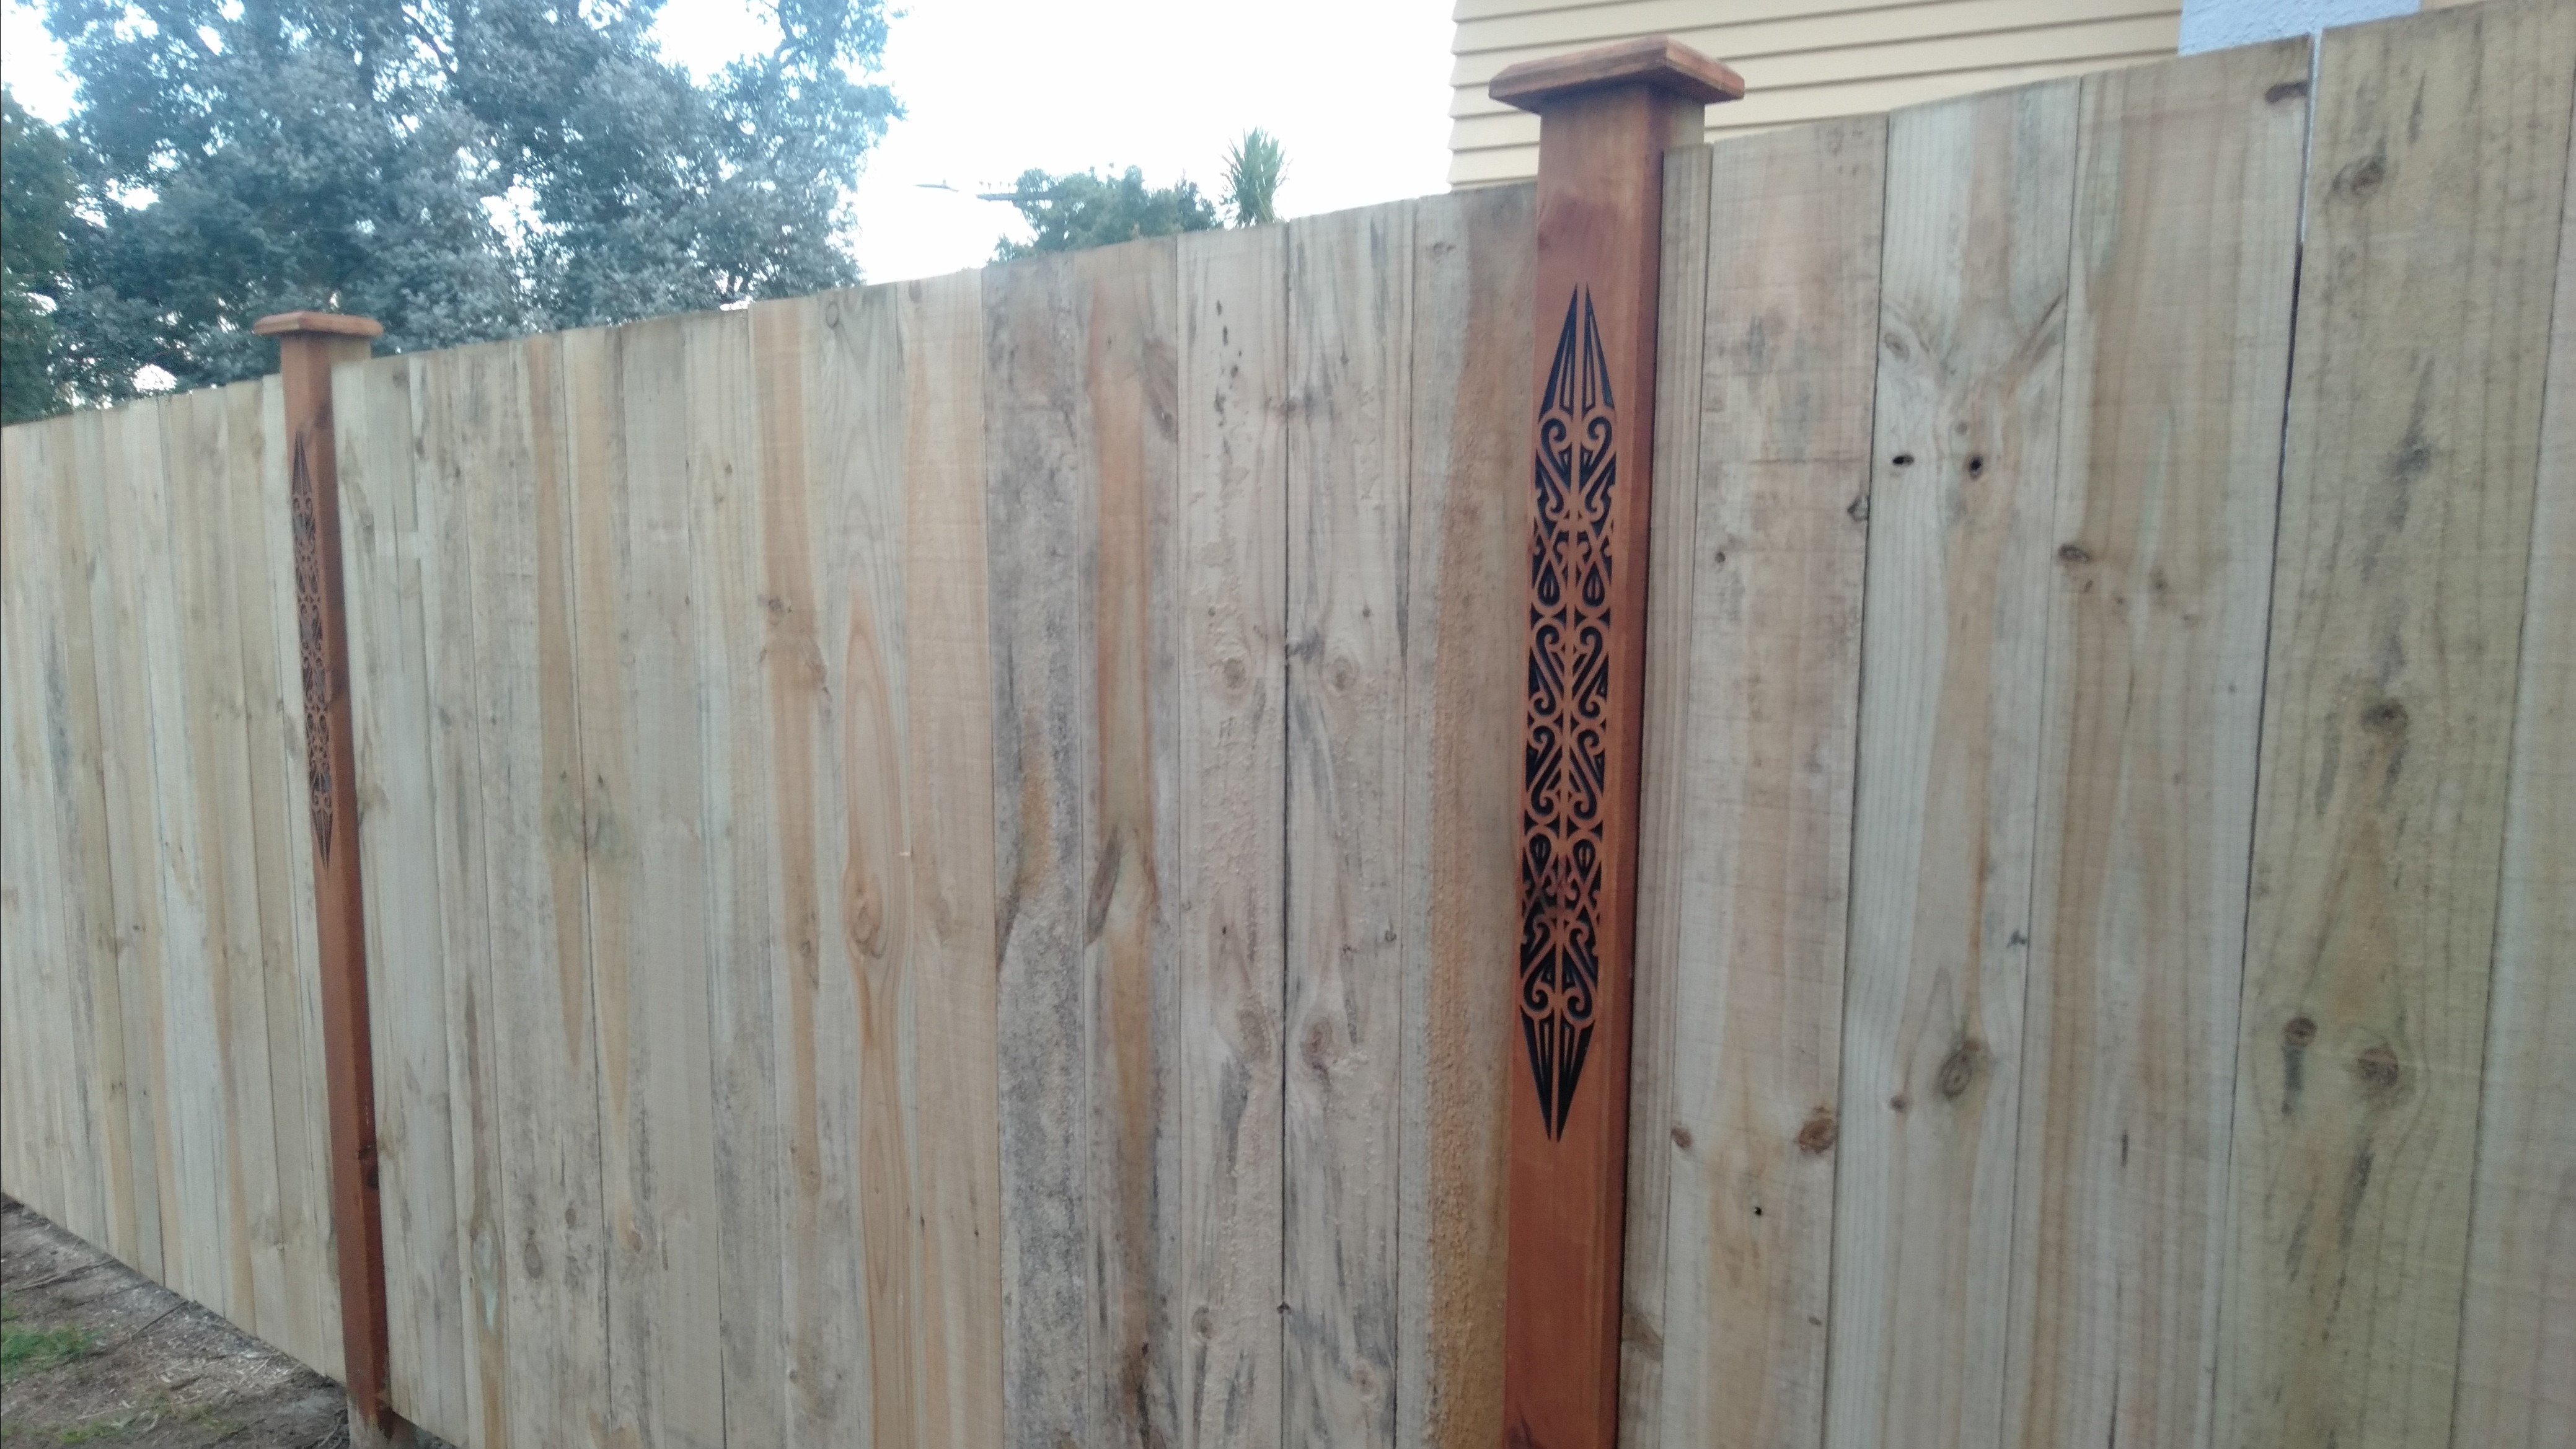 New NZ company showcases awesome custom fence posts to landscape your garden